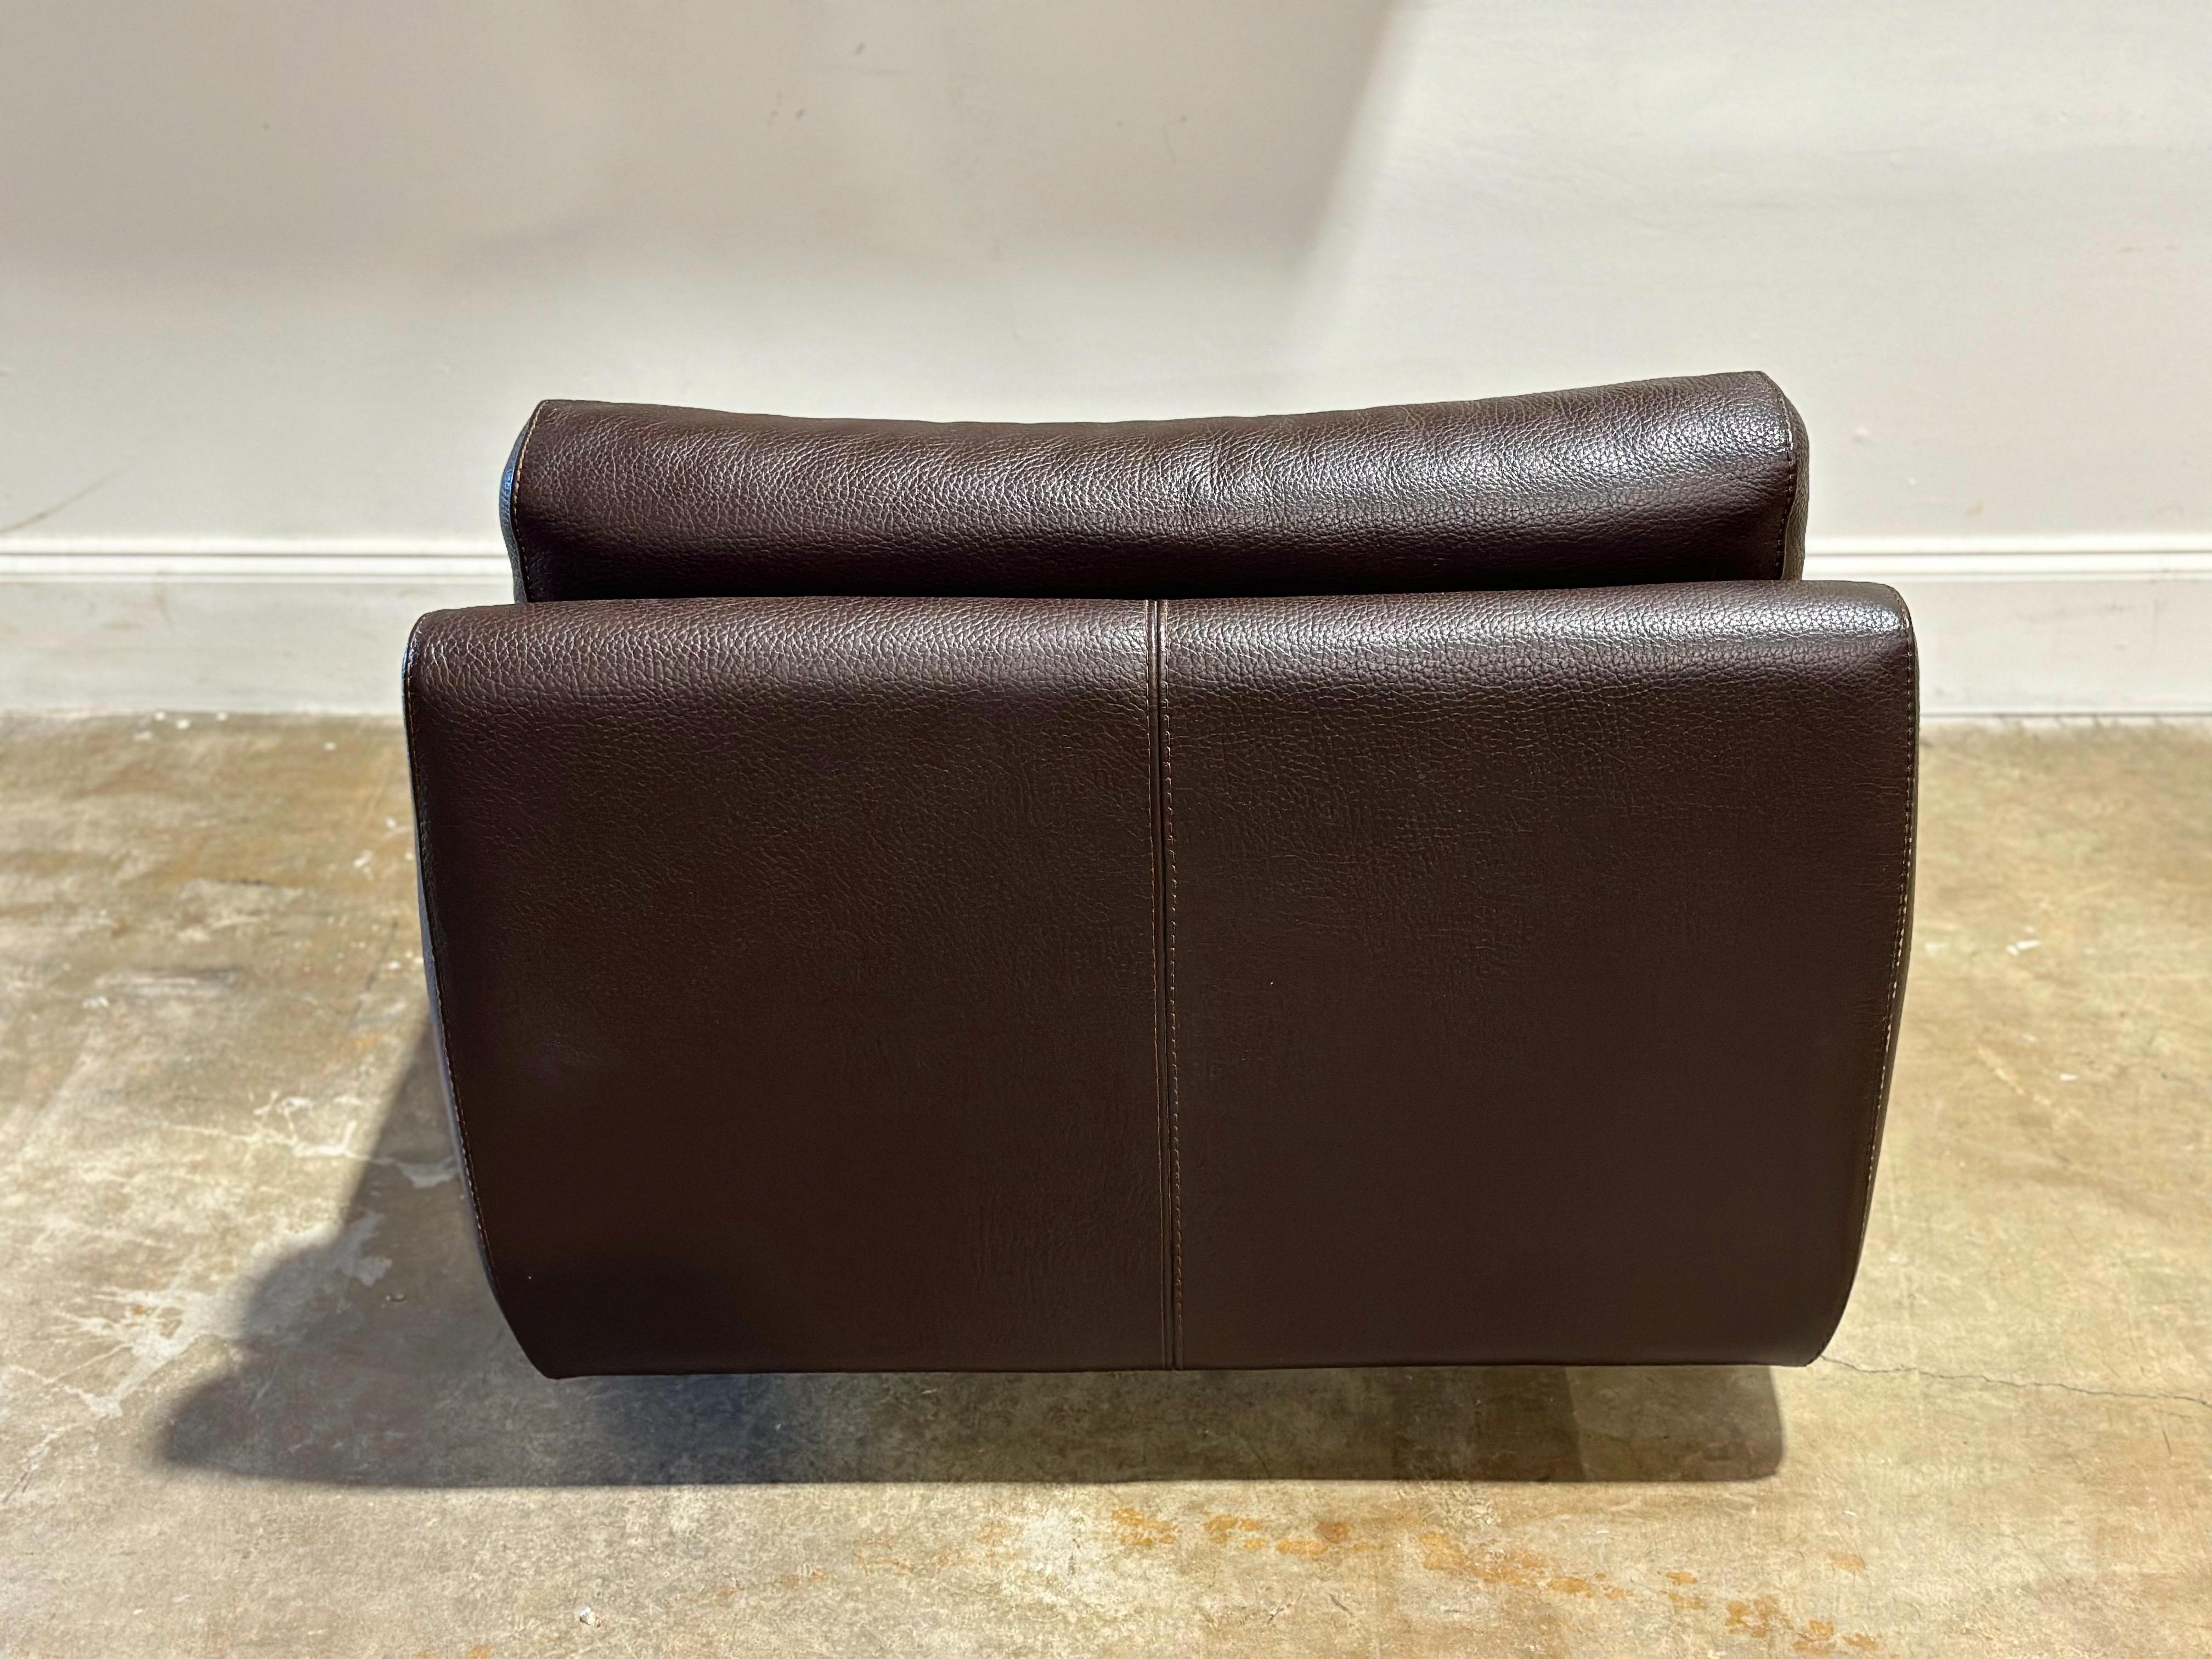 Vintage Roche Bobois Leather Swivel Lounge Chair - Dark Ox Blood Maroon Brown In Good Condition For Sale In Decatur, GA